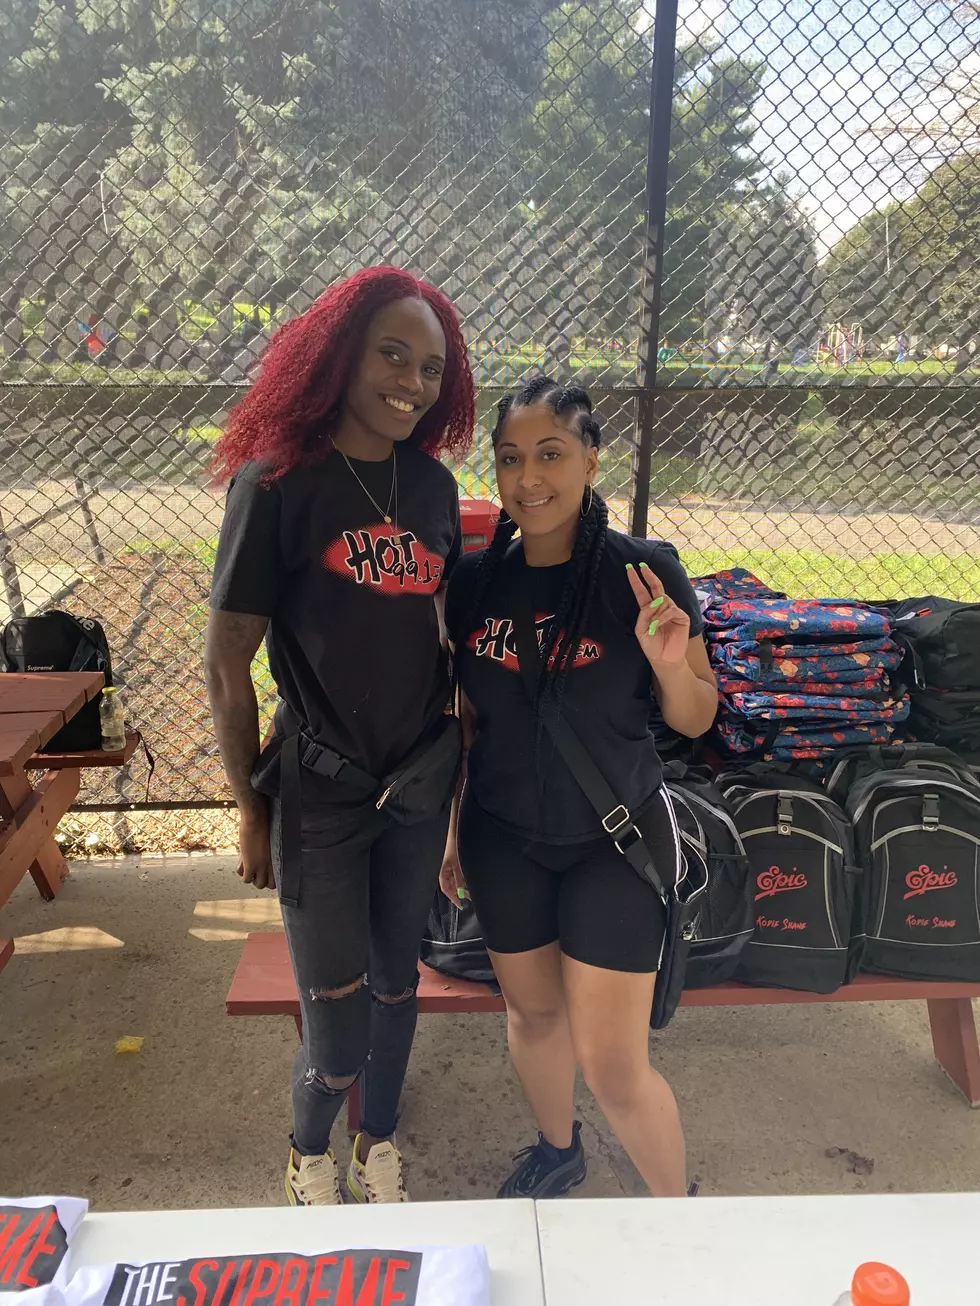 Hot991 3rd Annual Back to School Skate Party Recap